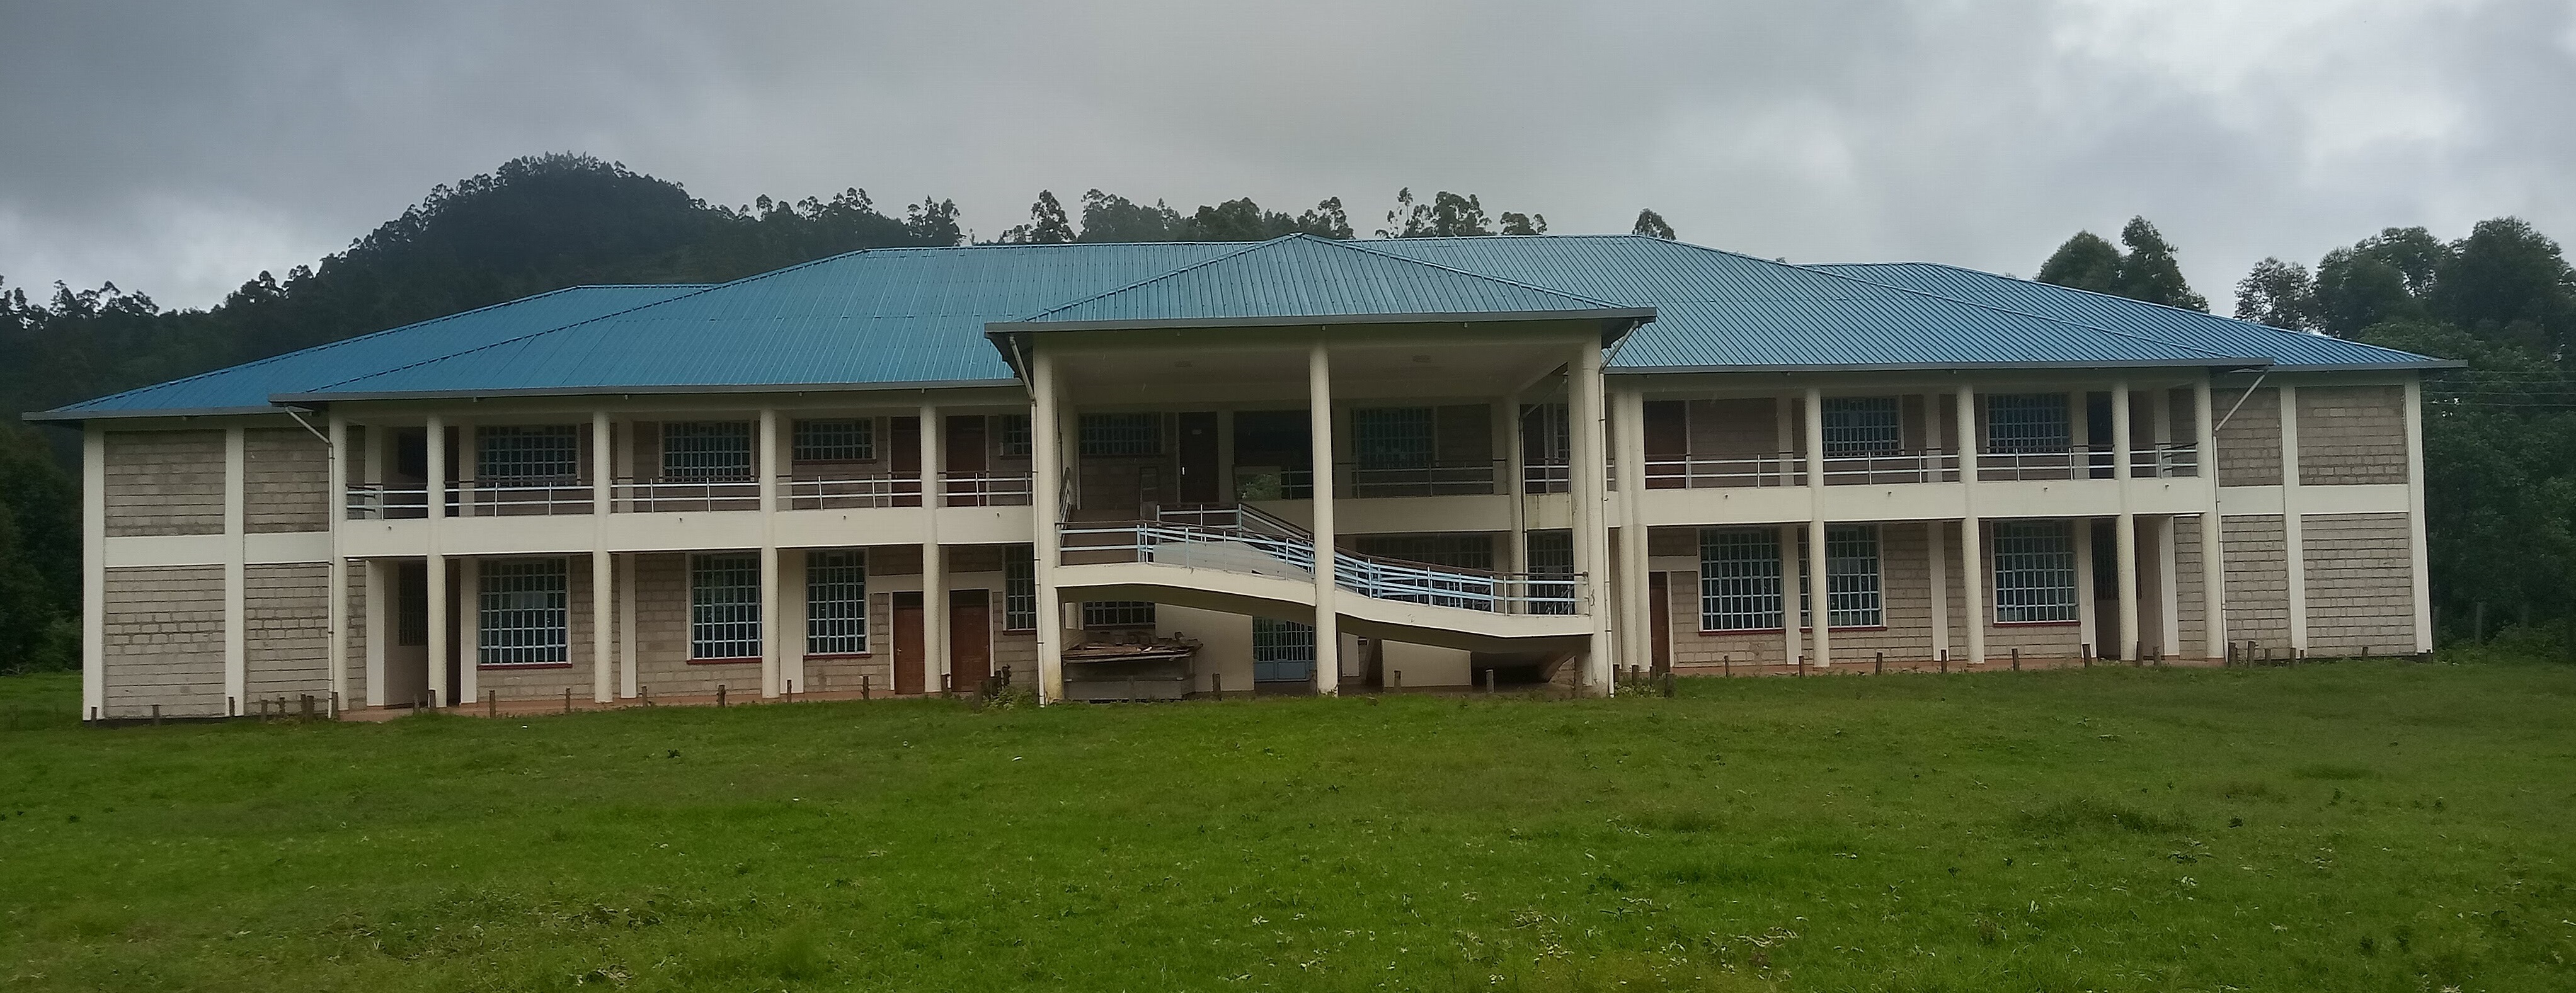 Kaelo Technical and Vocational College